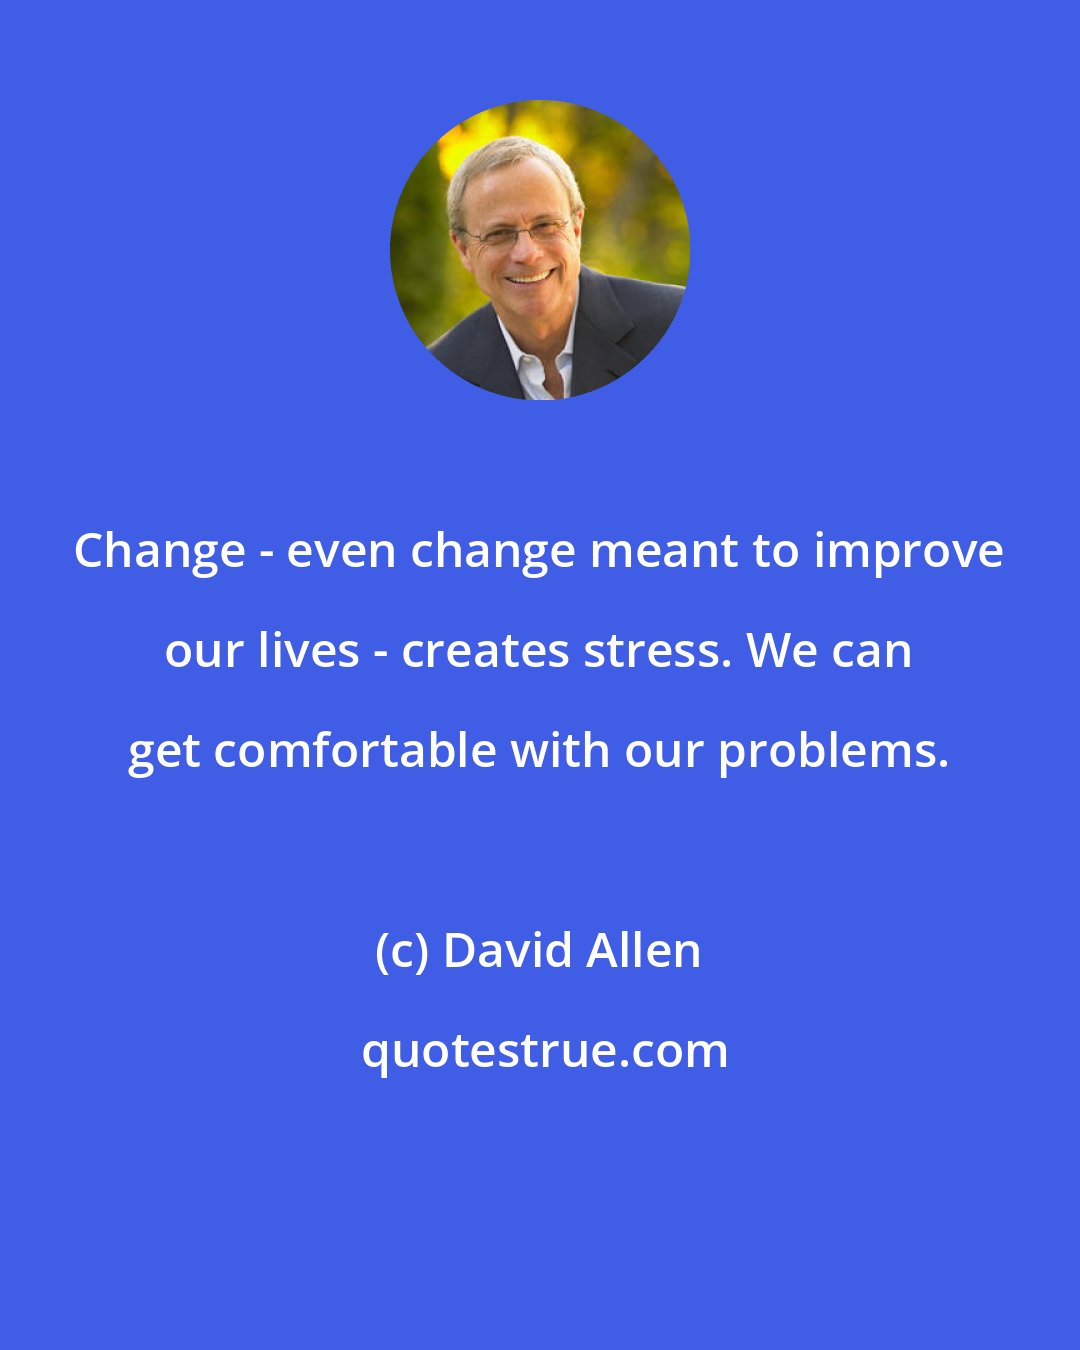 David Allen: Change - even change meant to improve our lives - creates stress. We can get comfortable with our problems.